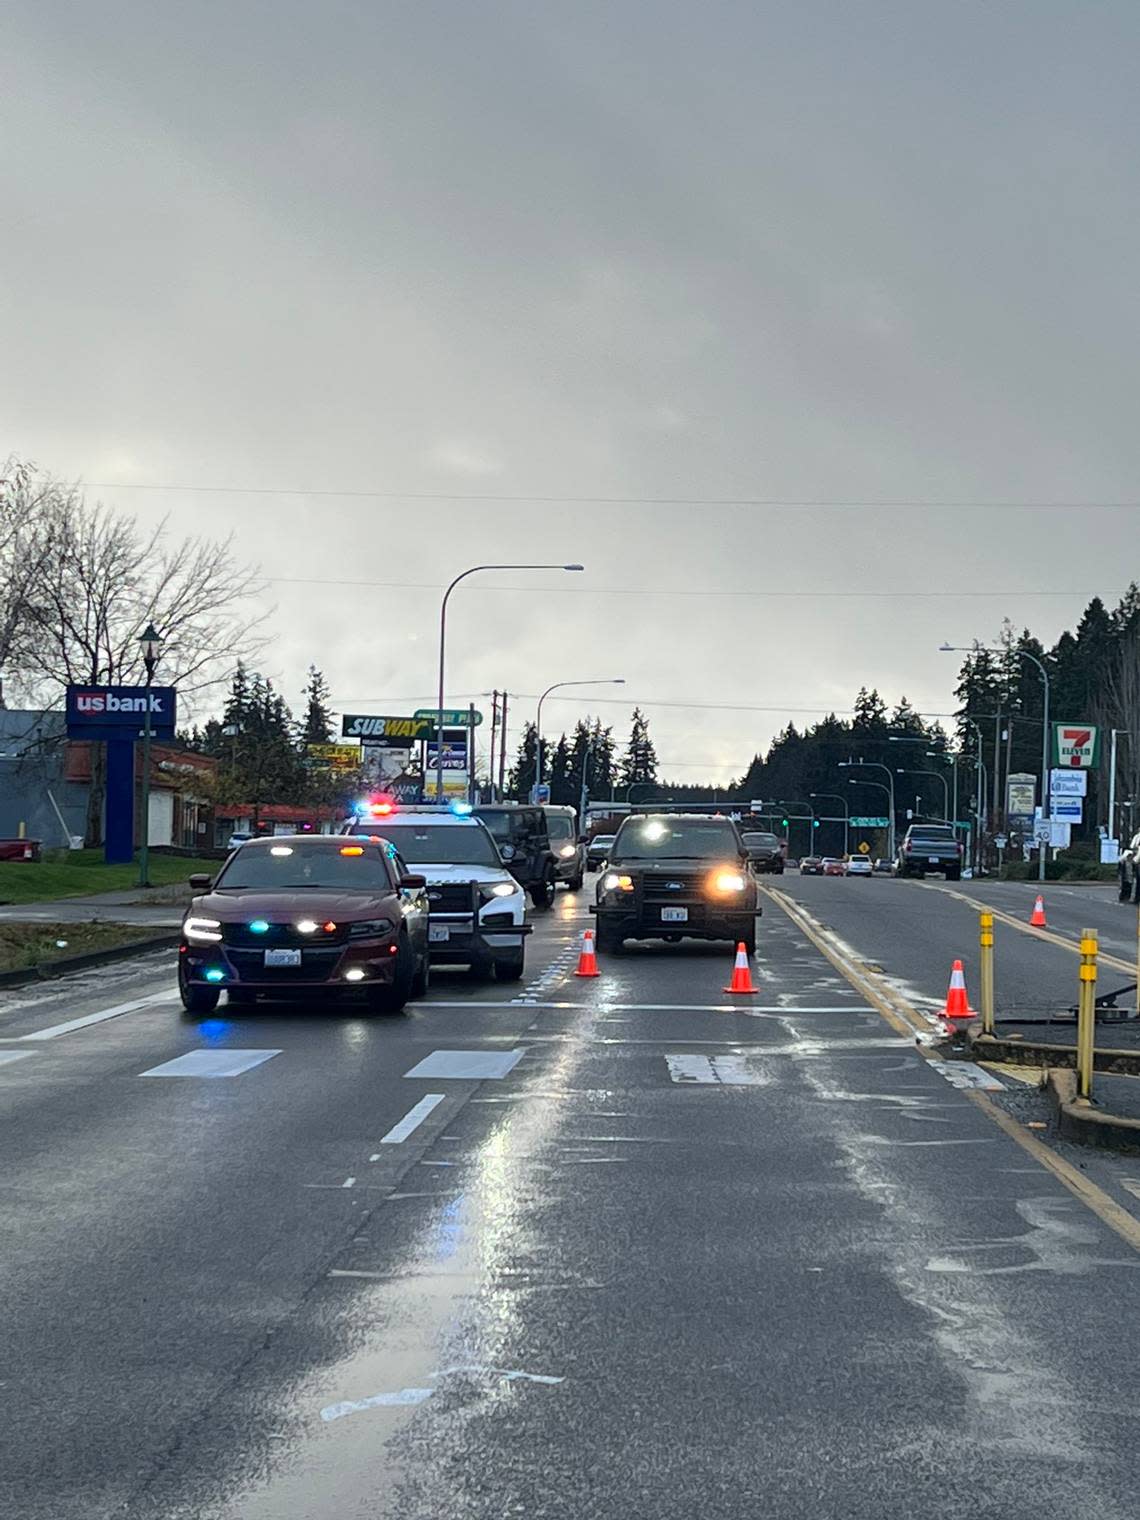 A 27-year-old man was struck and injured by a driver Monday afternoon on Pacific Avenue in Spanaway, according to the Washington State Patrol. Troopers are investigating the incident.